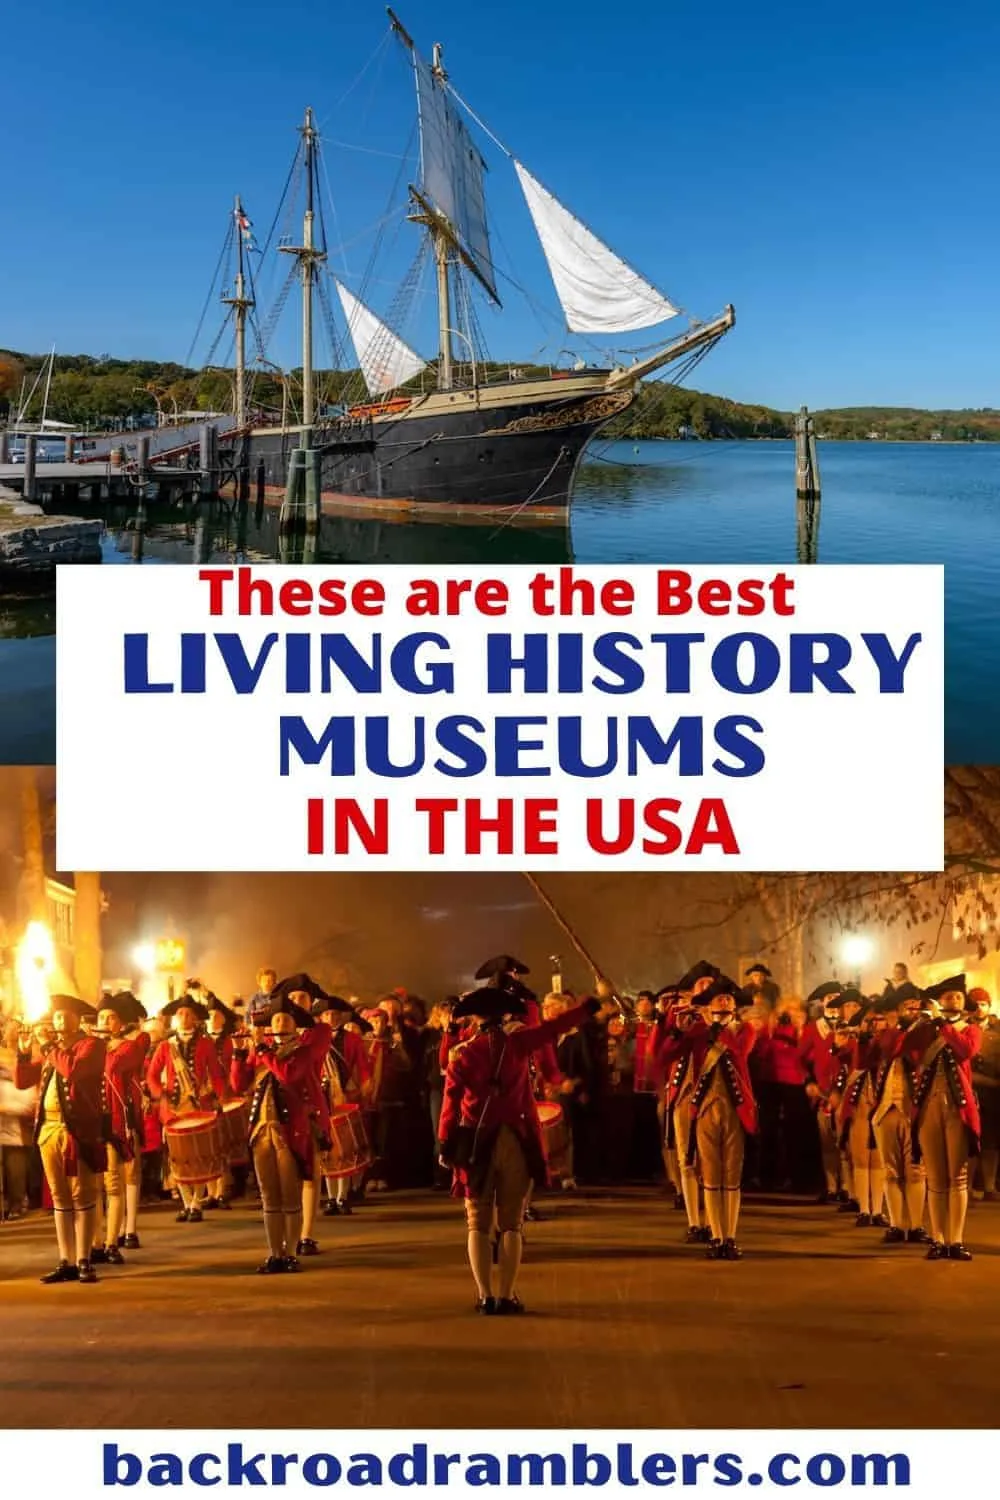 A collage of photos featuring living history museums in the United States